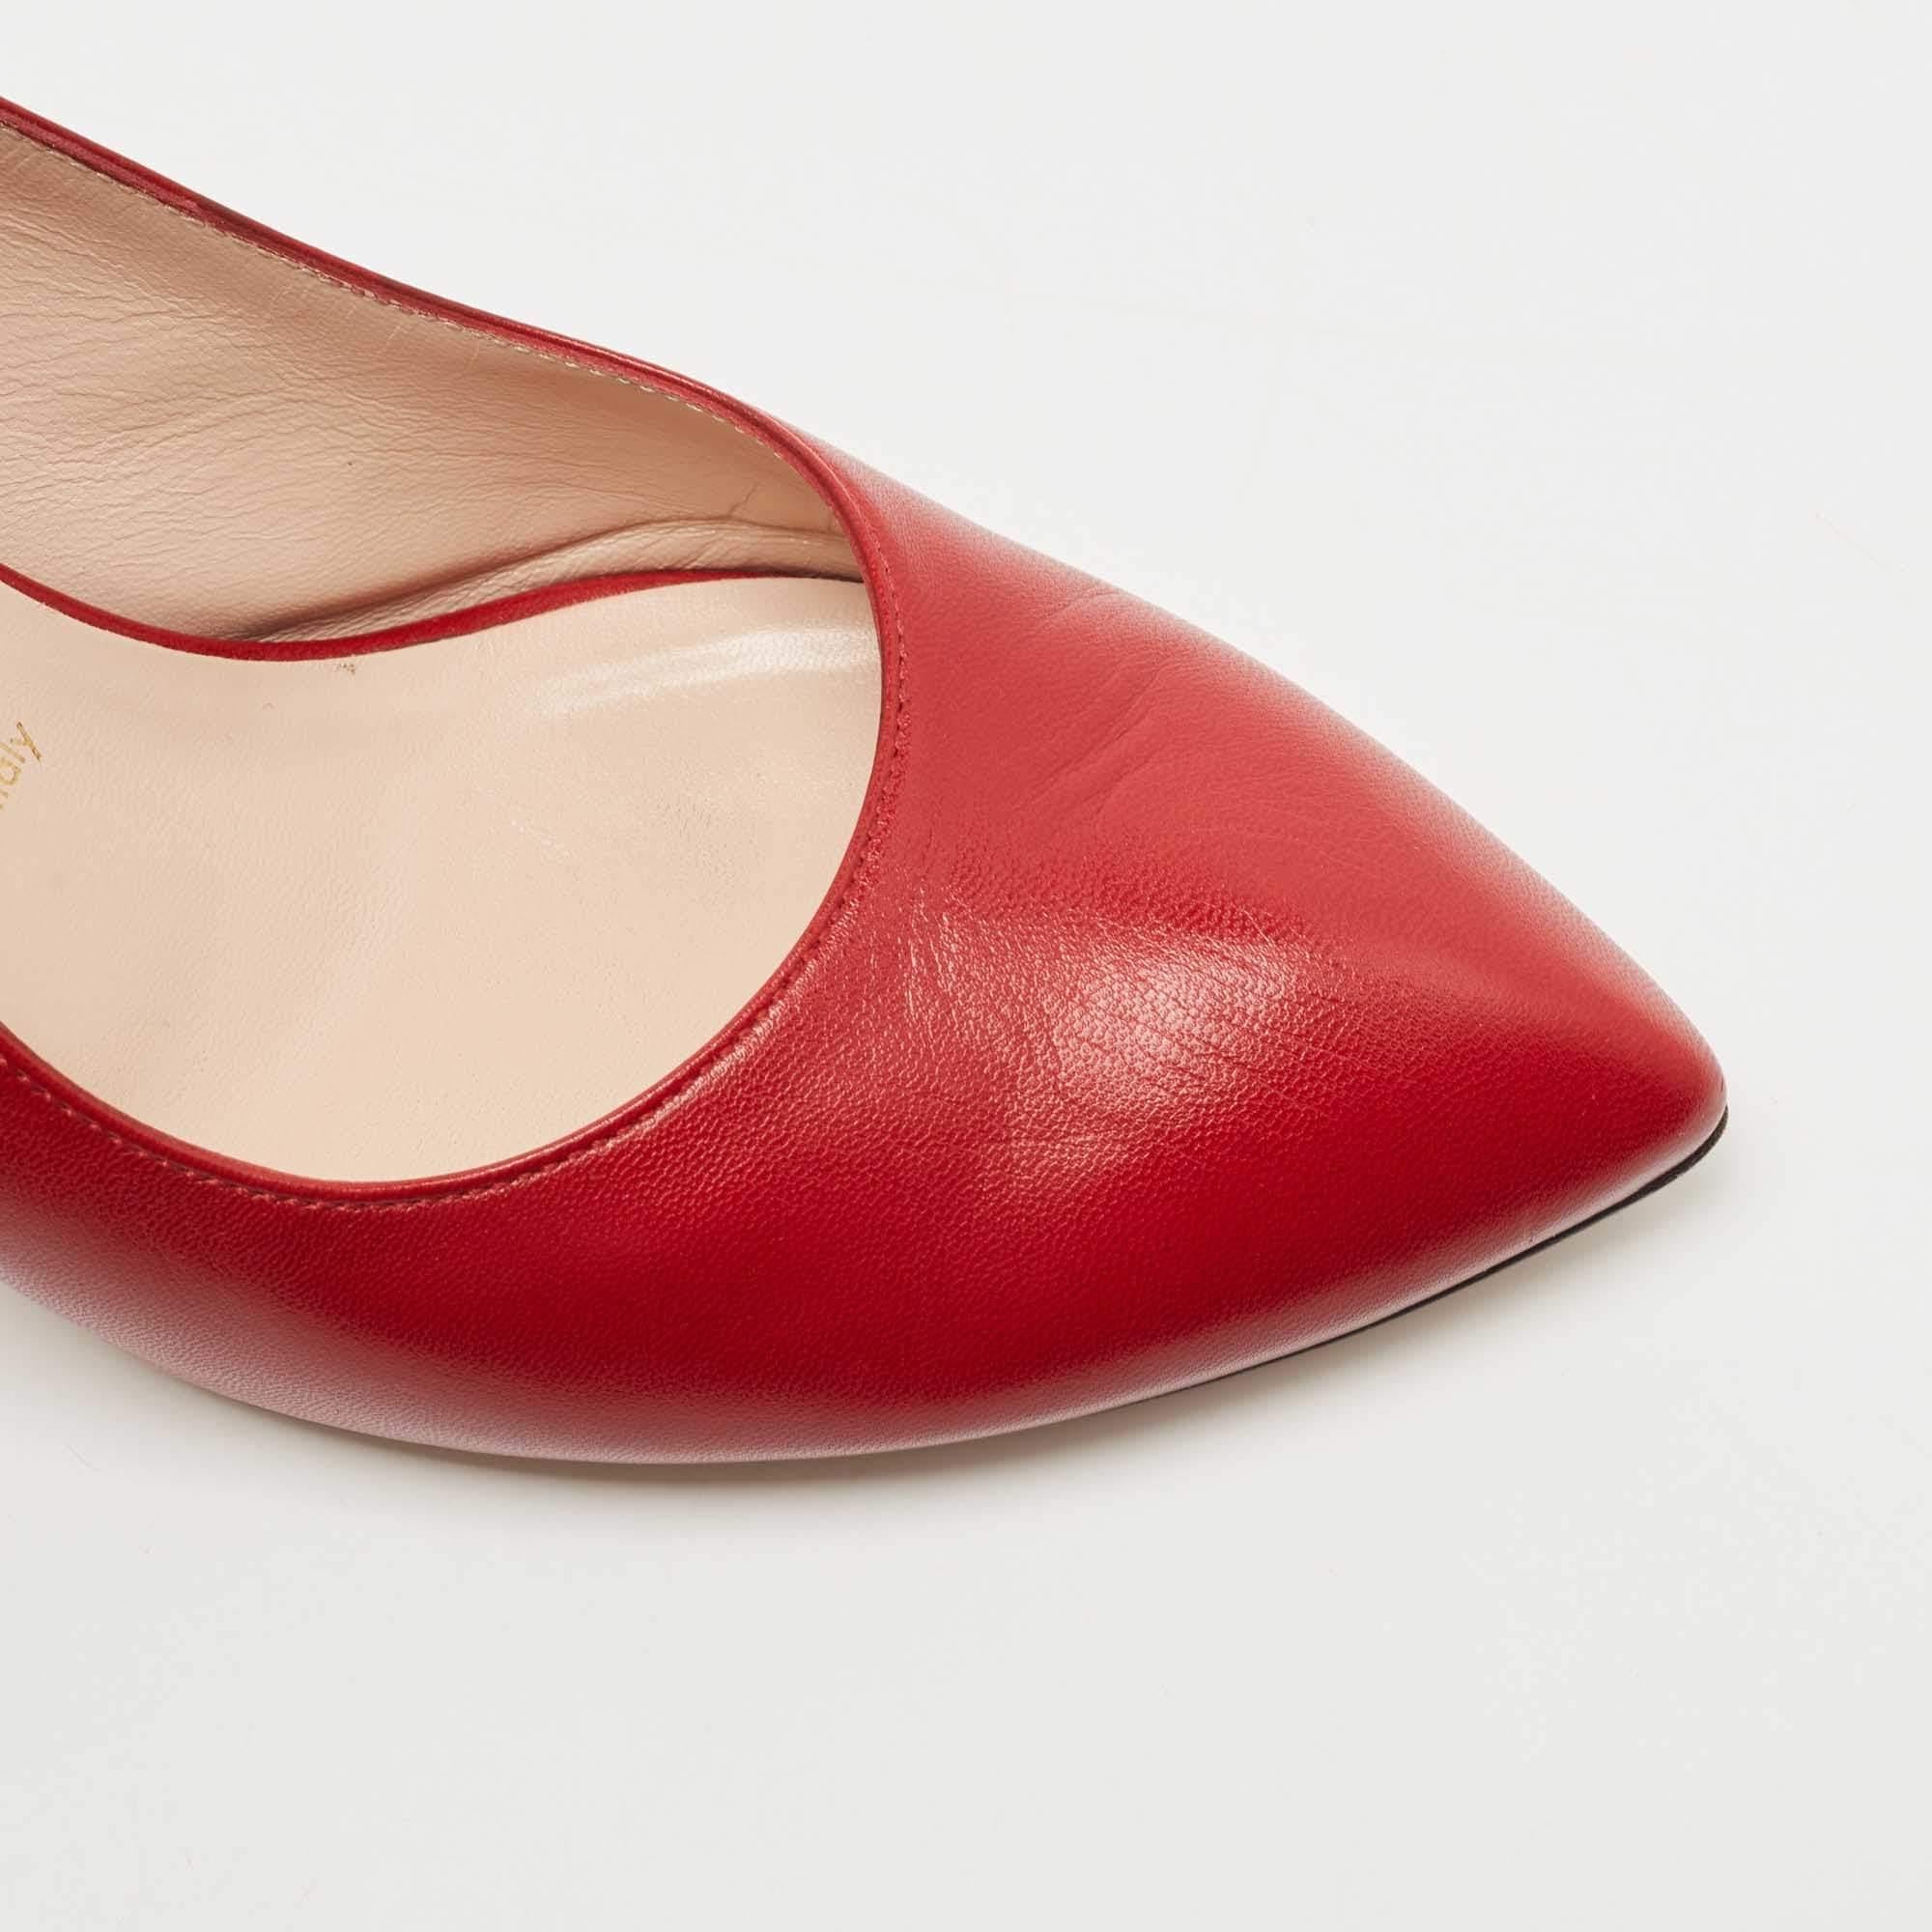 Gucci Red Leather Sylvie Web Slingback Pumps Size 38.5 1